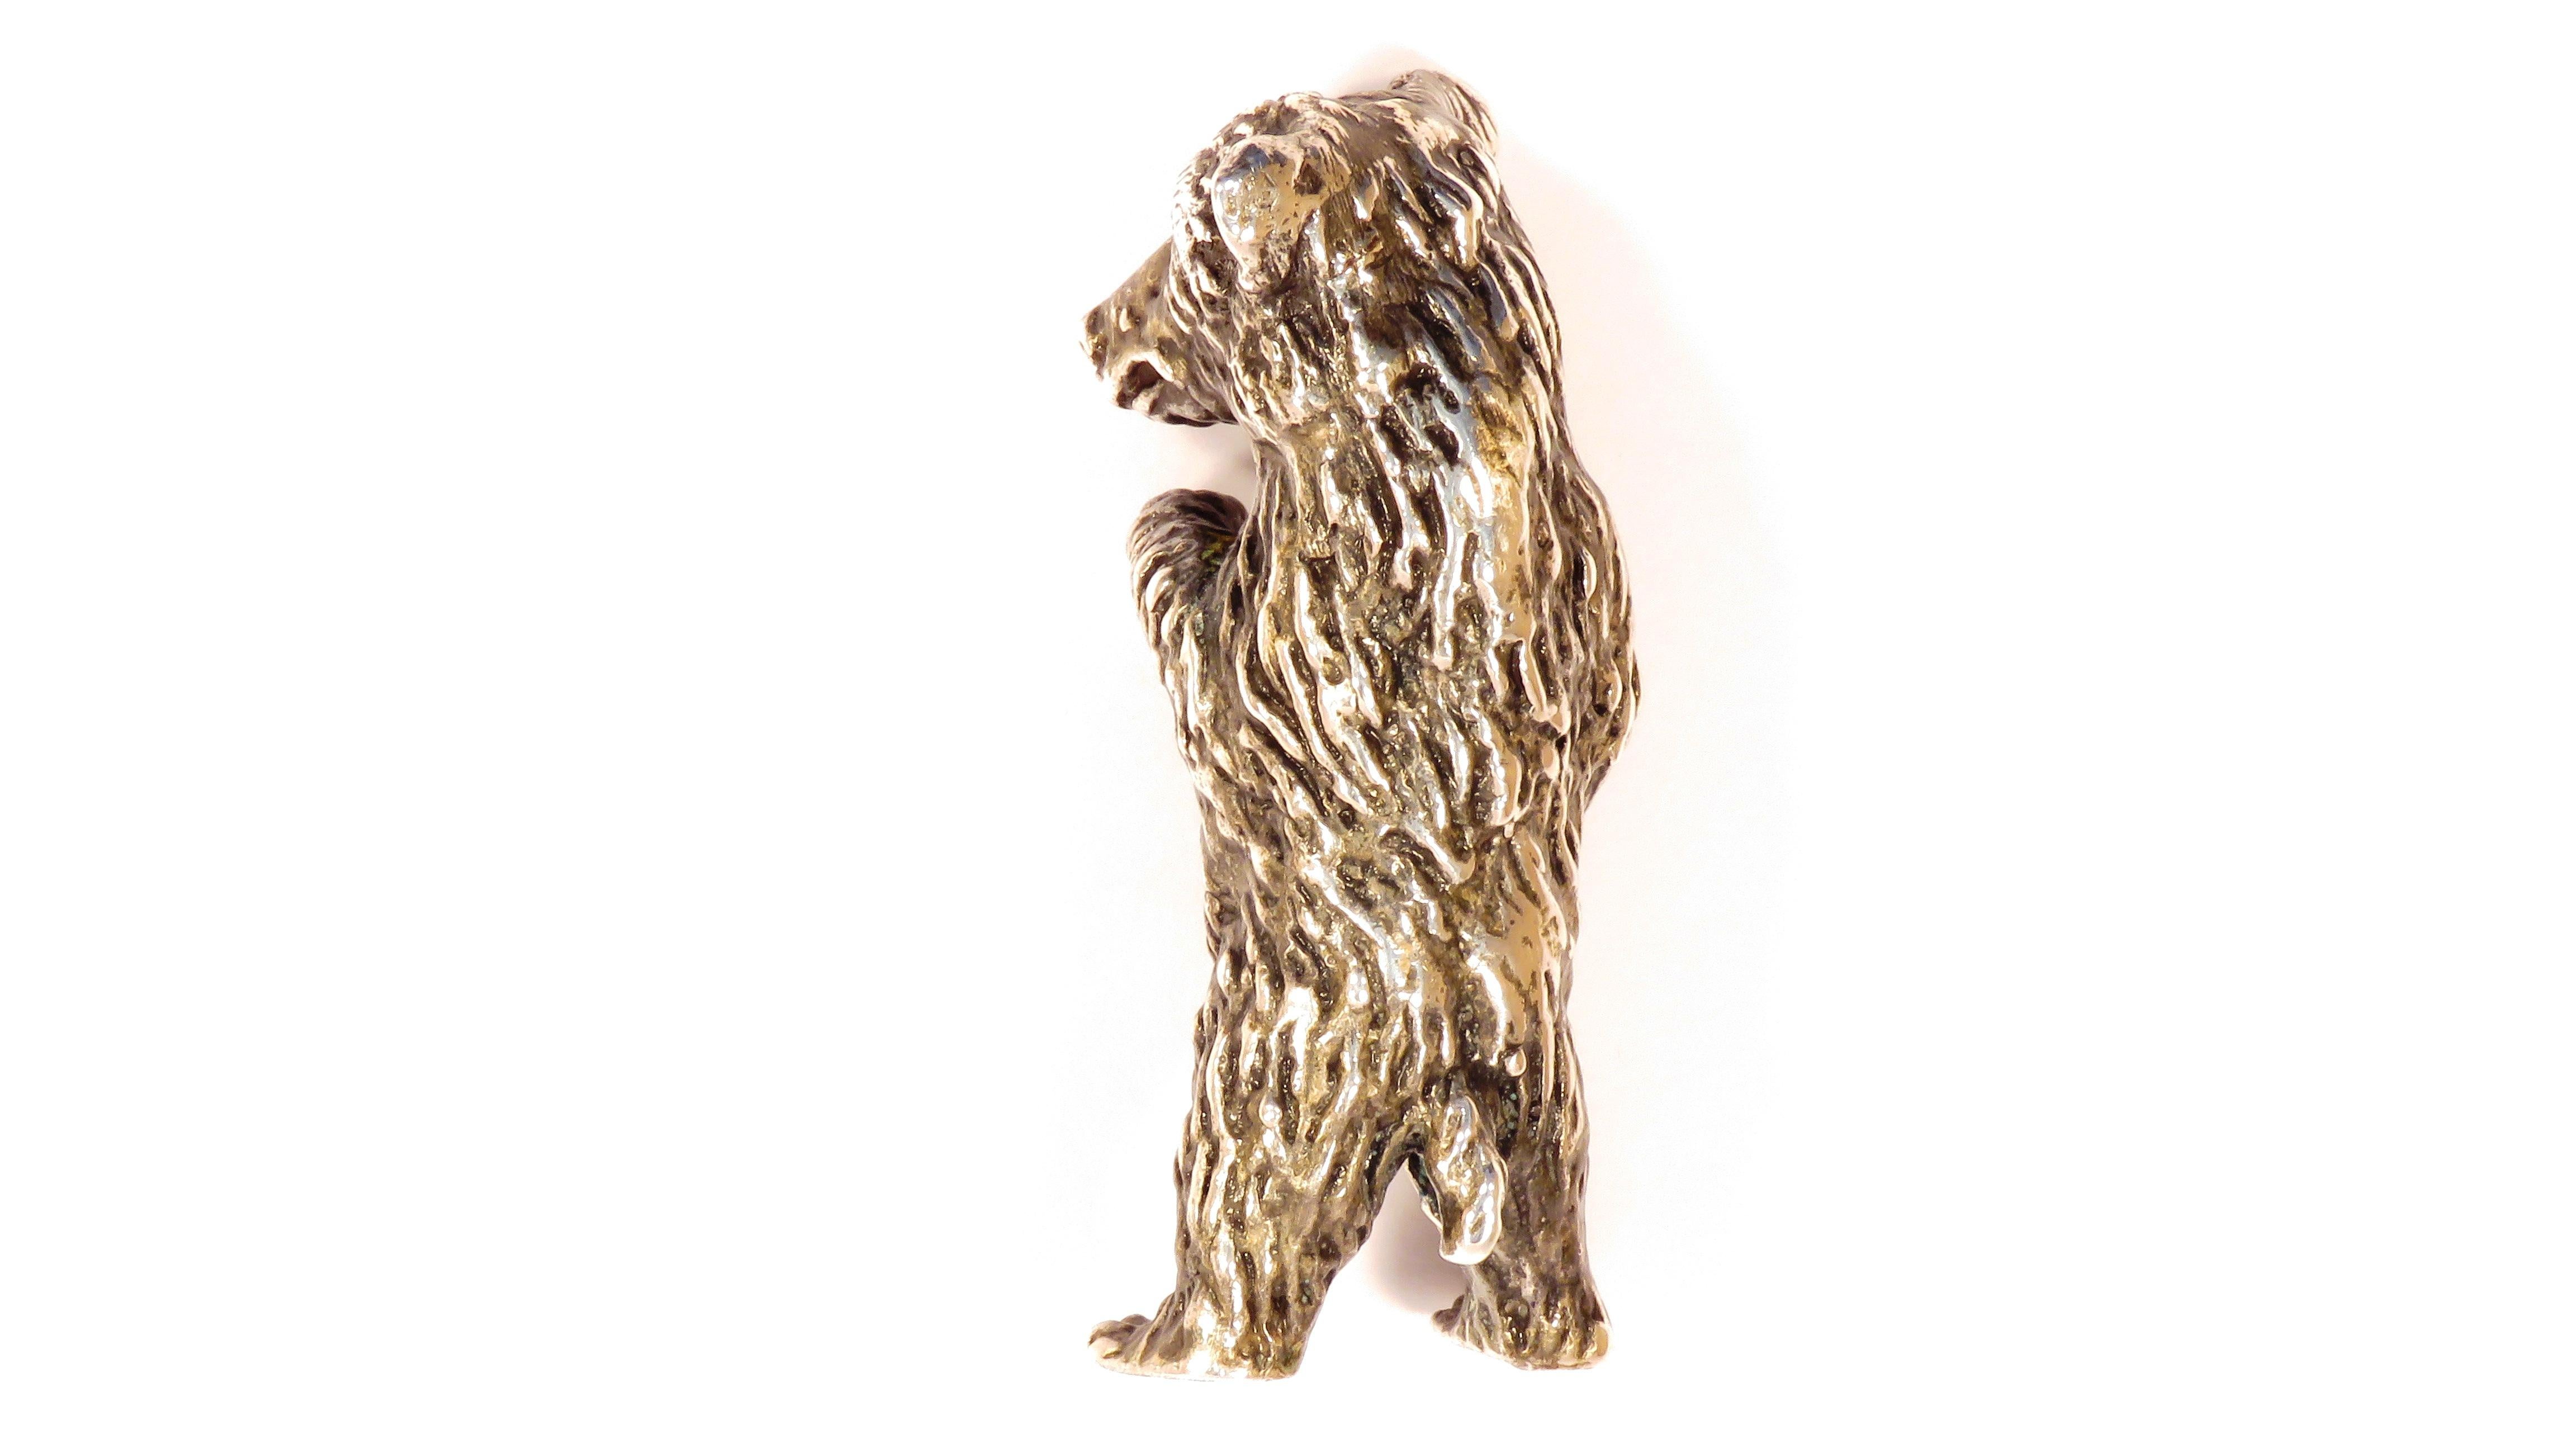 Solid silver bear in very good vintage condition.
Dimensions: Height 64 mm / 2.519 inches - Length 24 mm / 0.944 inches - Weight 62 grams.
It  is stamped with the Silver Italian Mark 800 - AR  - AREZZO -